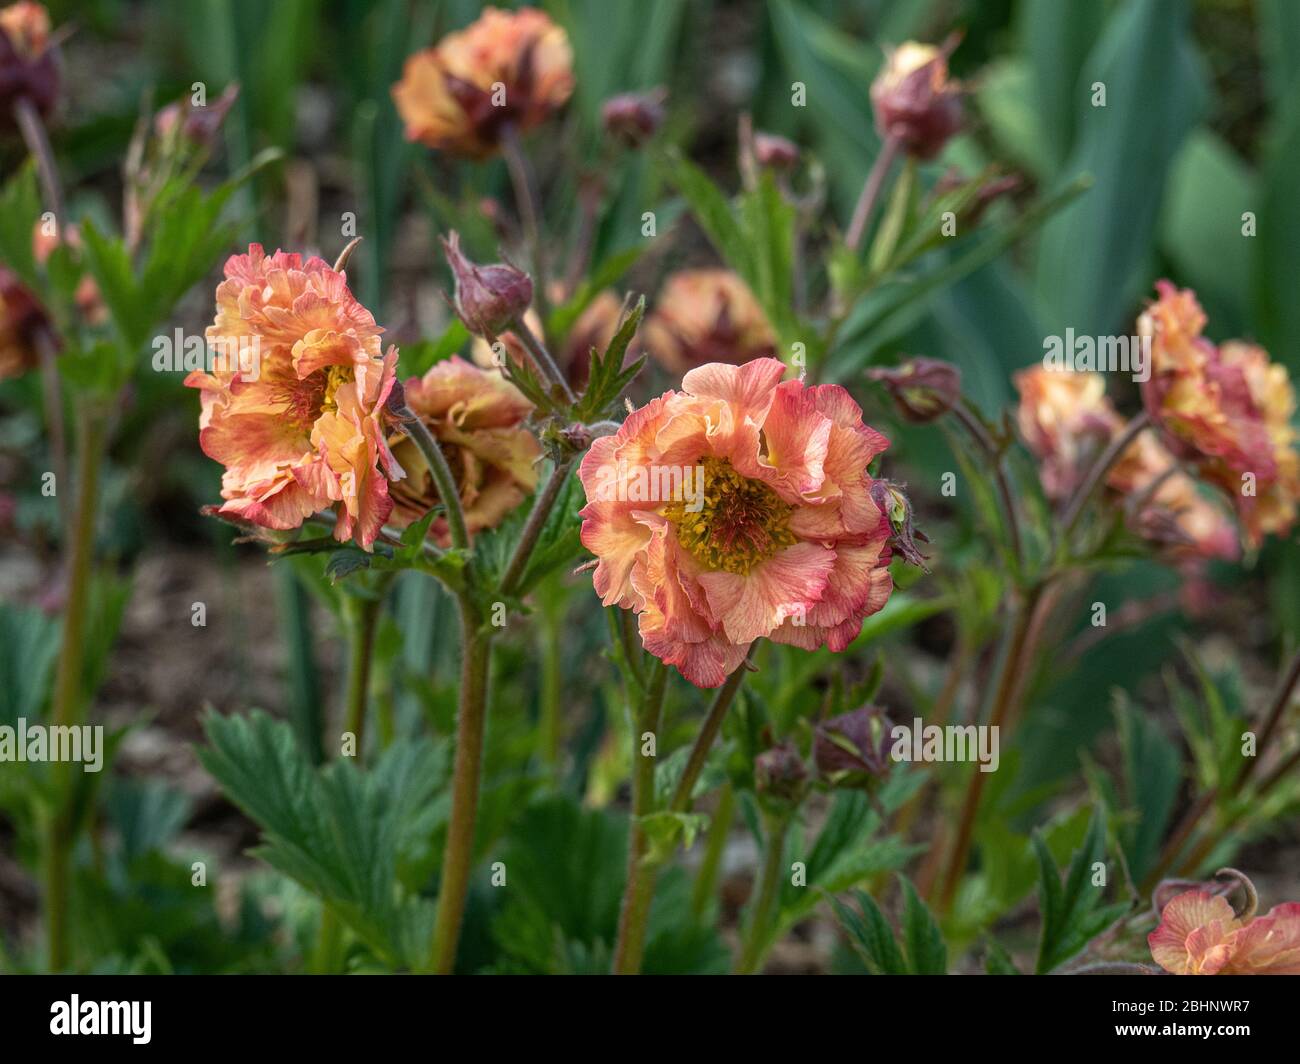 A group of the apricot pink semi double flowers of Geum rivale Mai Tai Stock Photo